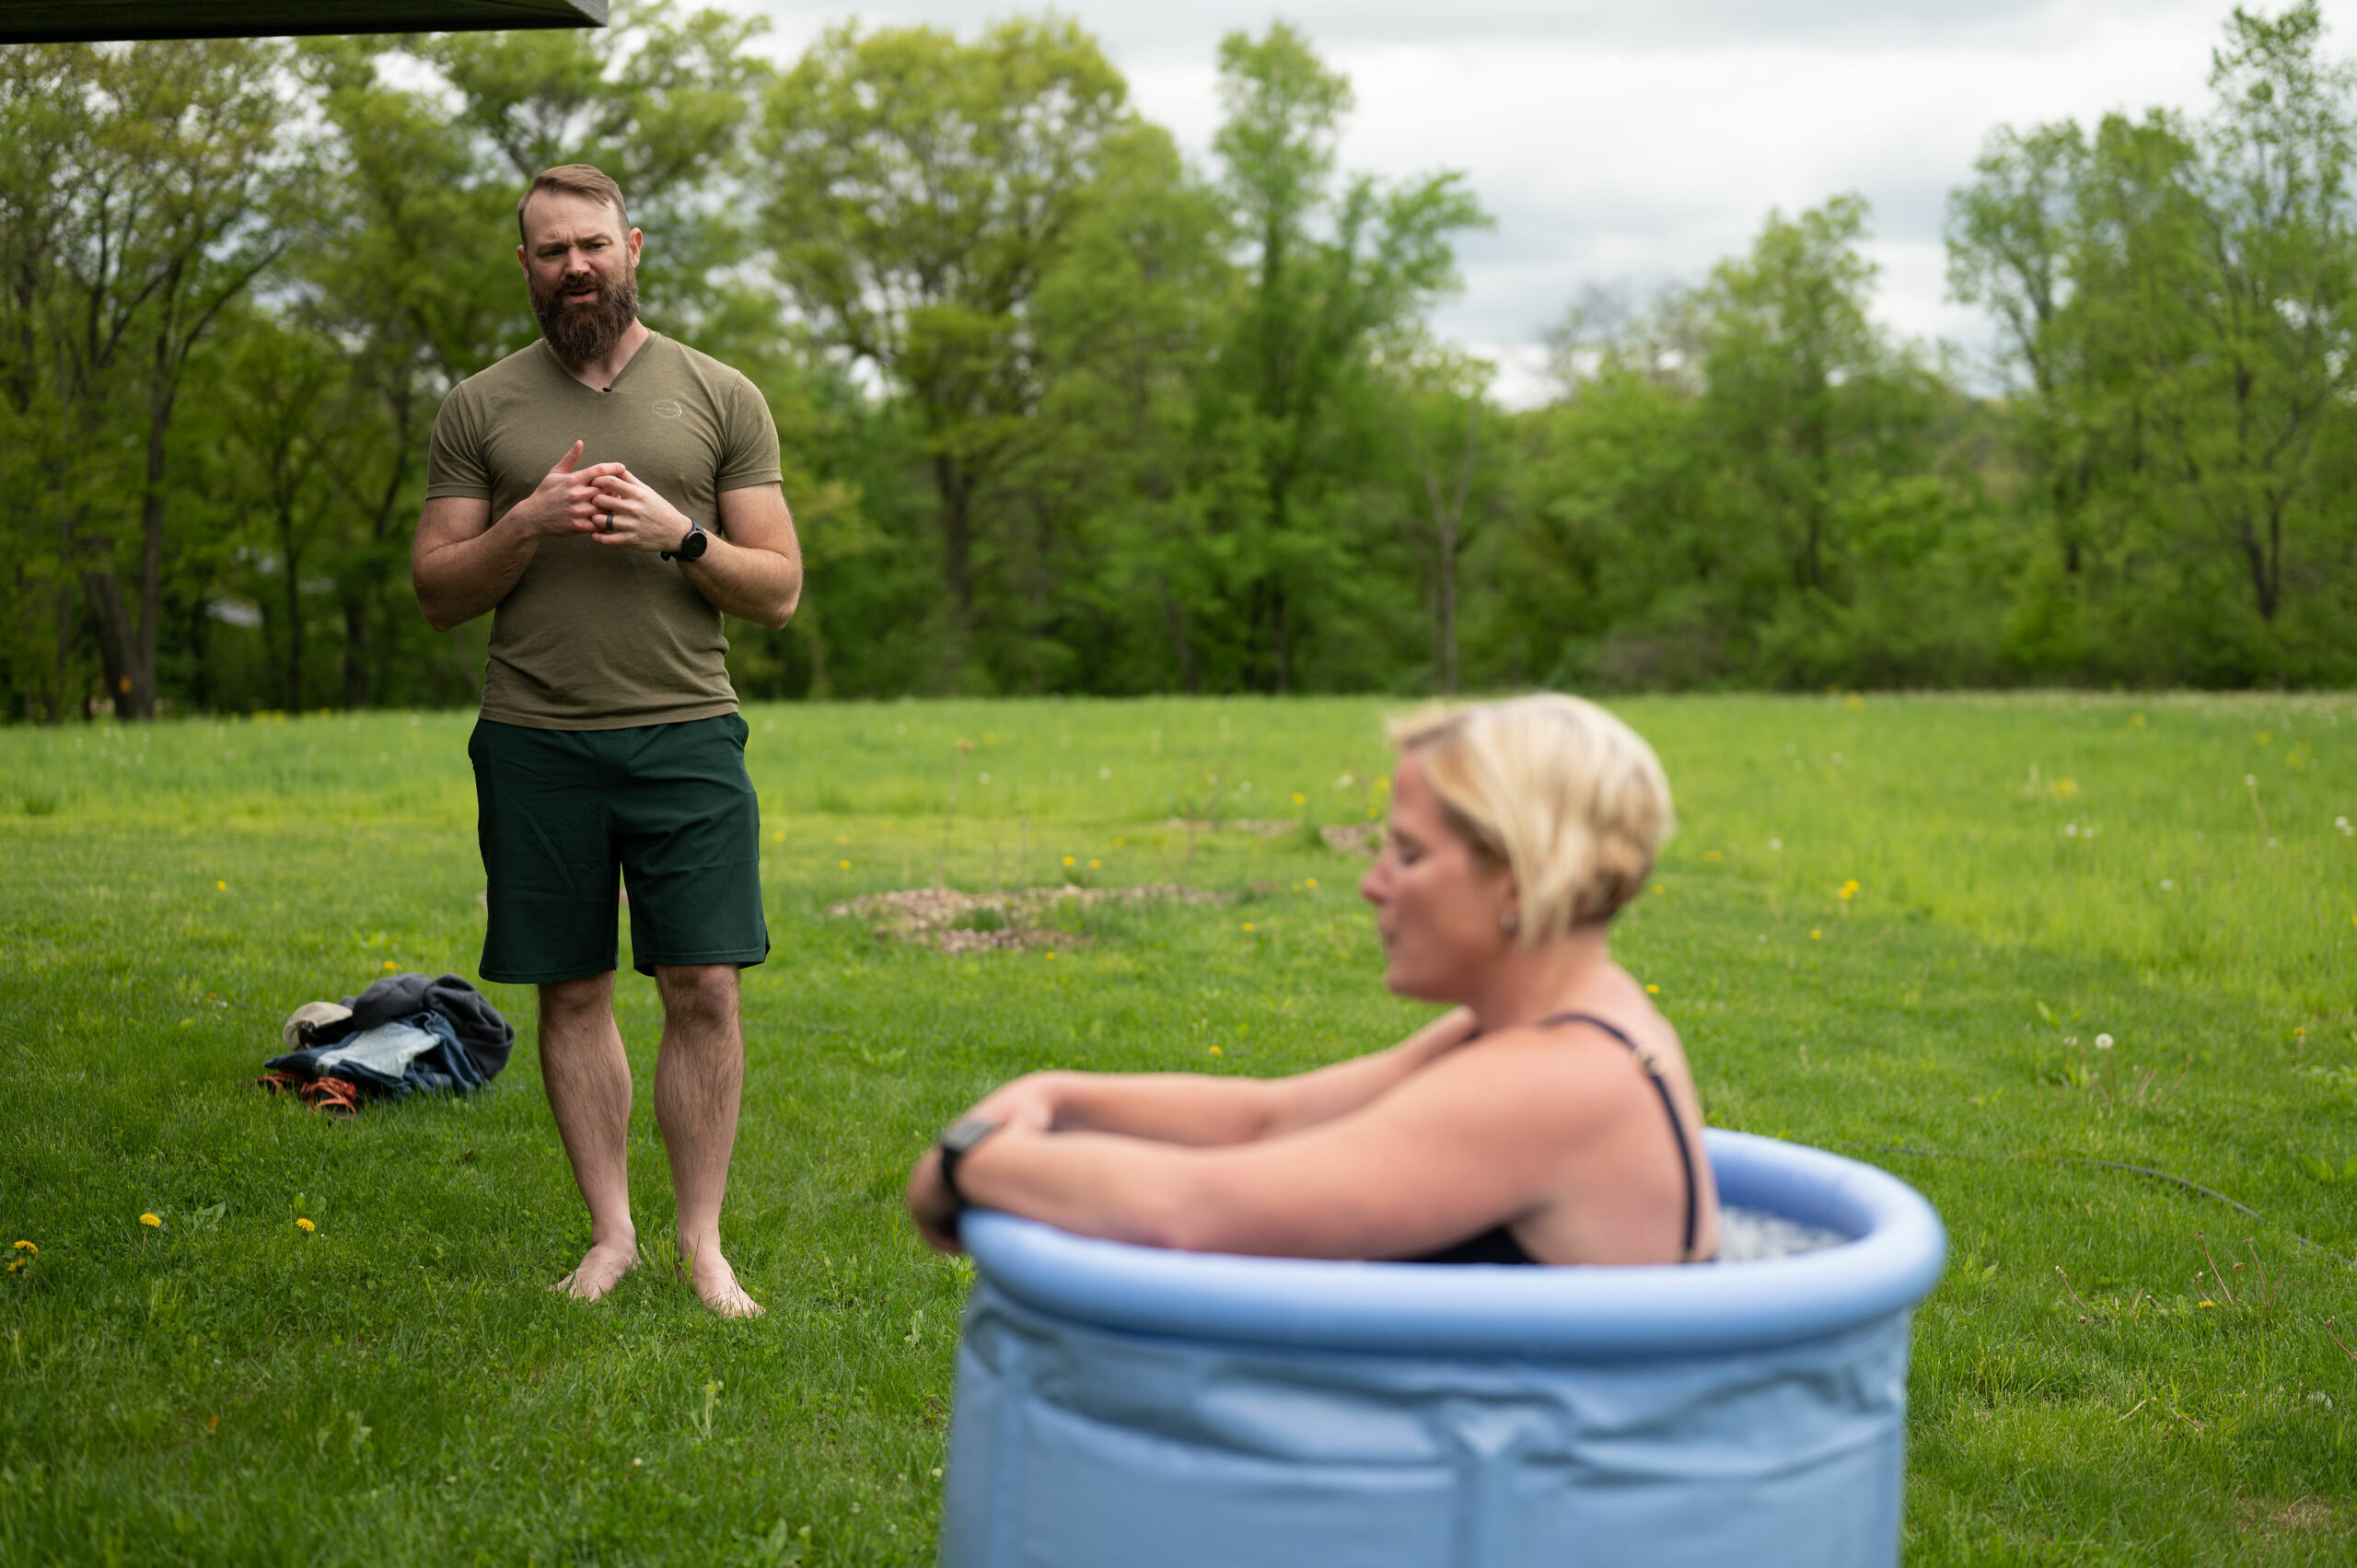 Man watching woman in an ice bath in the woods